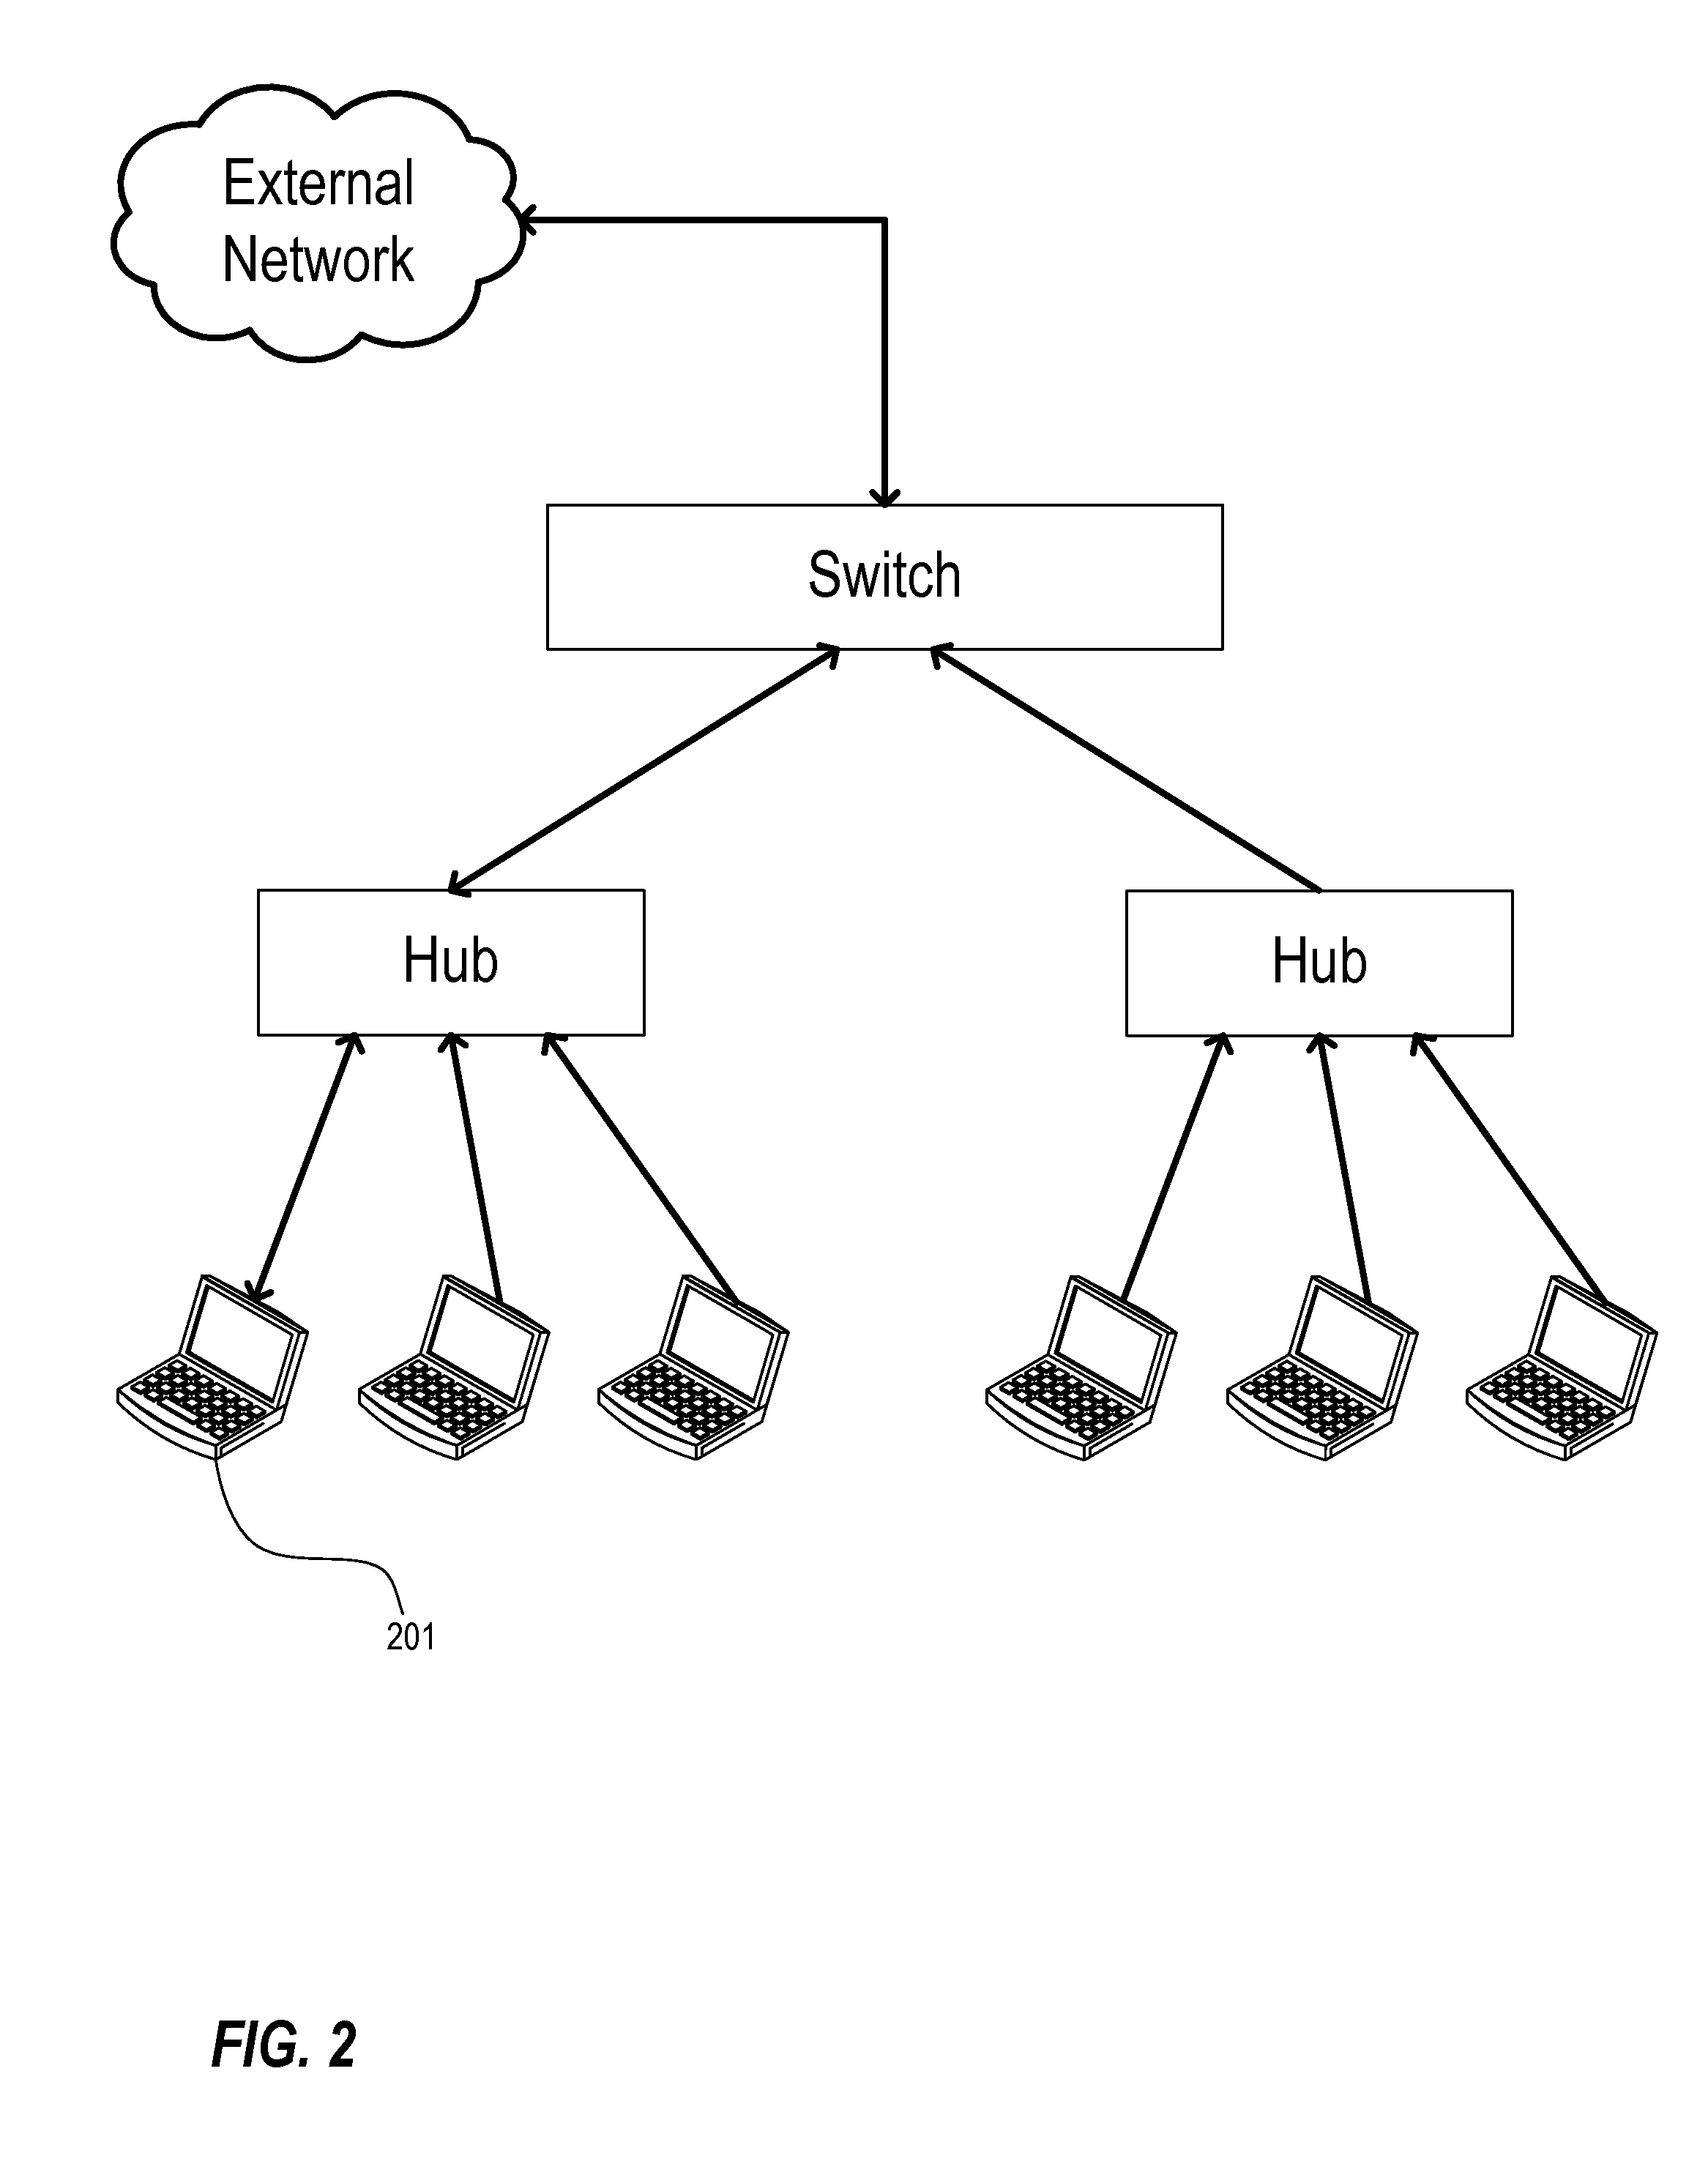 Facilitating network communications with control server, hosting server, and devices utilizing virtual network connections